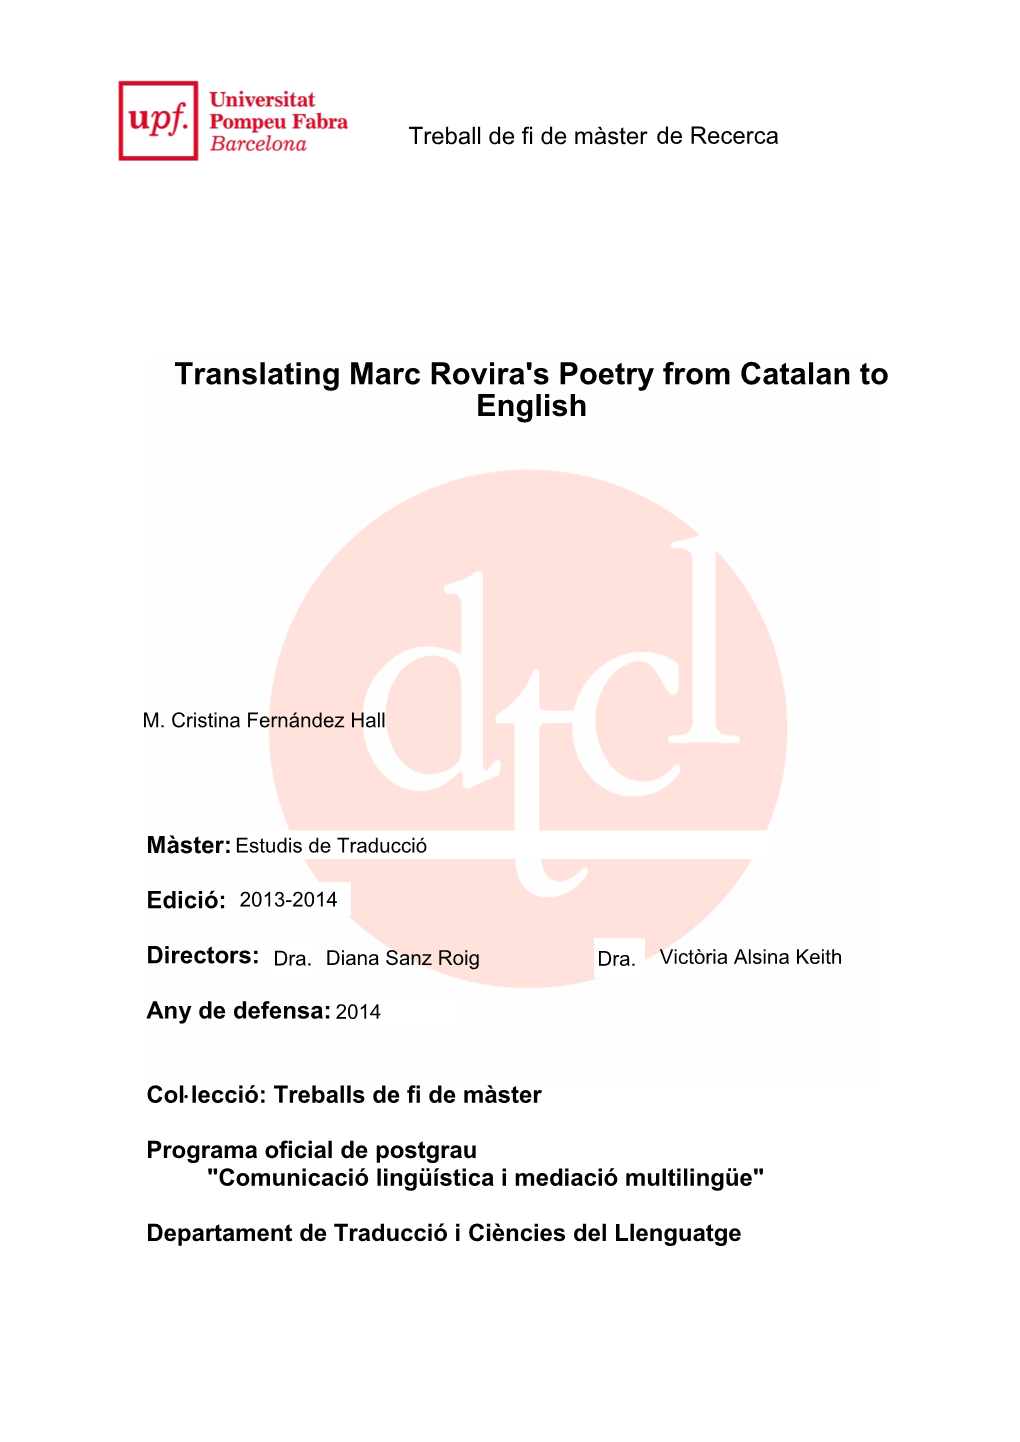 Translating Marc Rovira's Poetry from Catalan to English